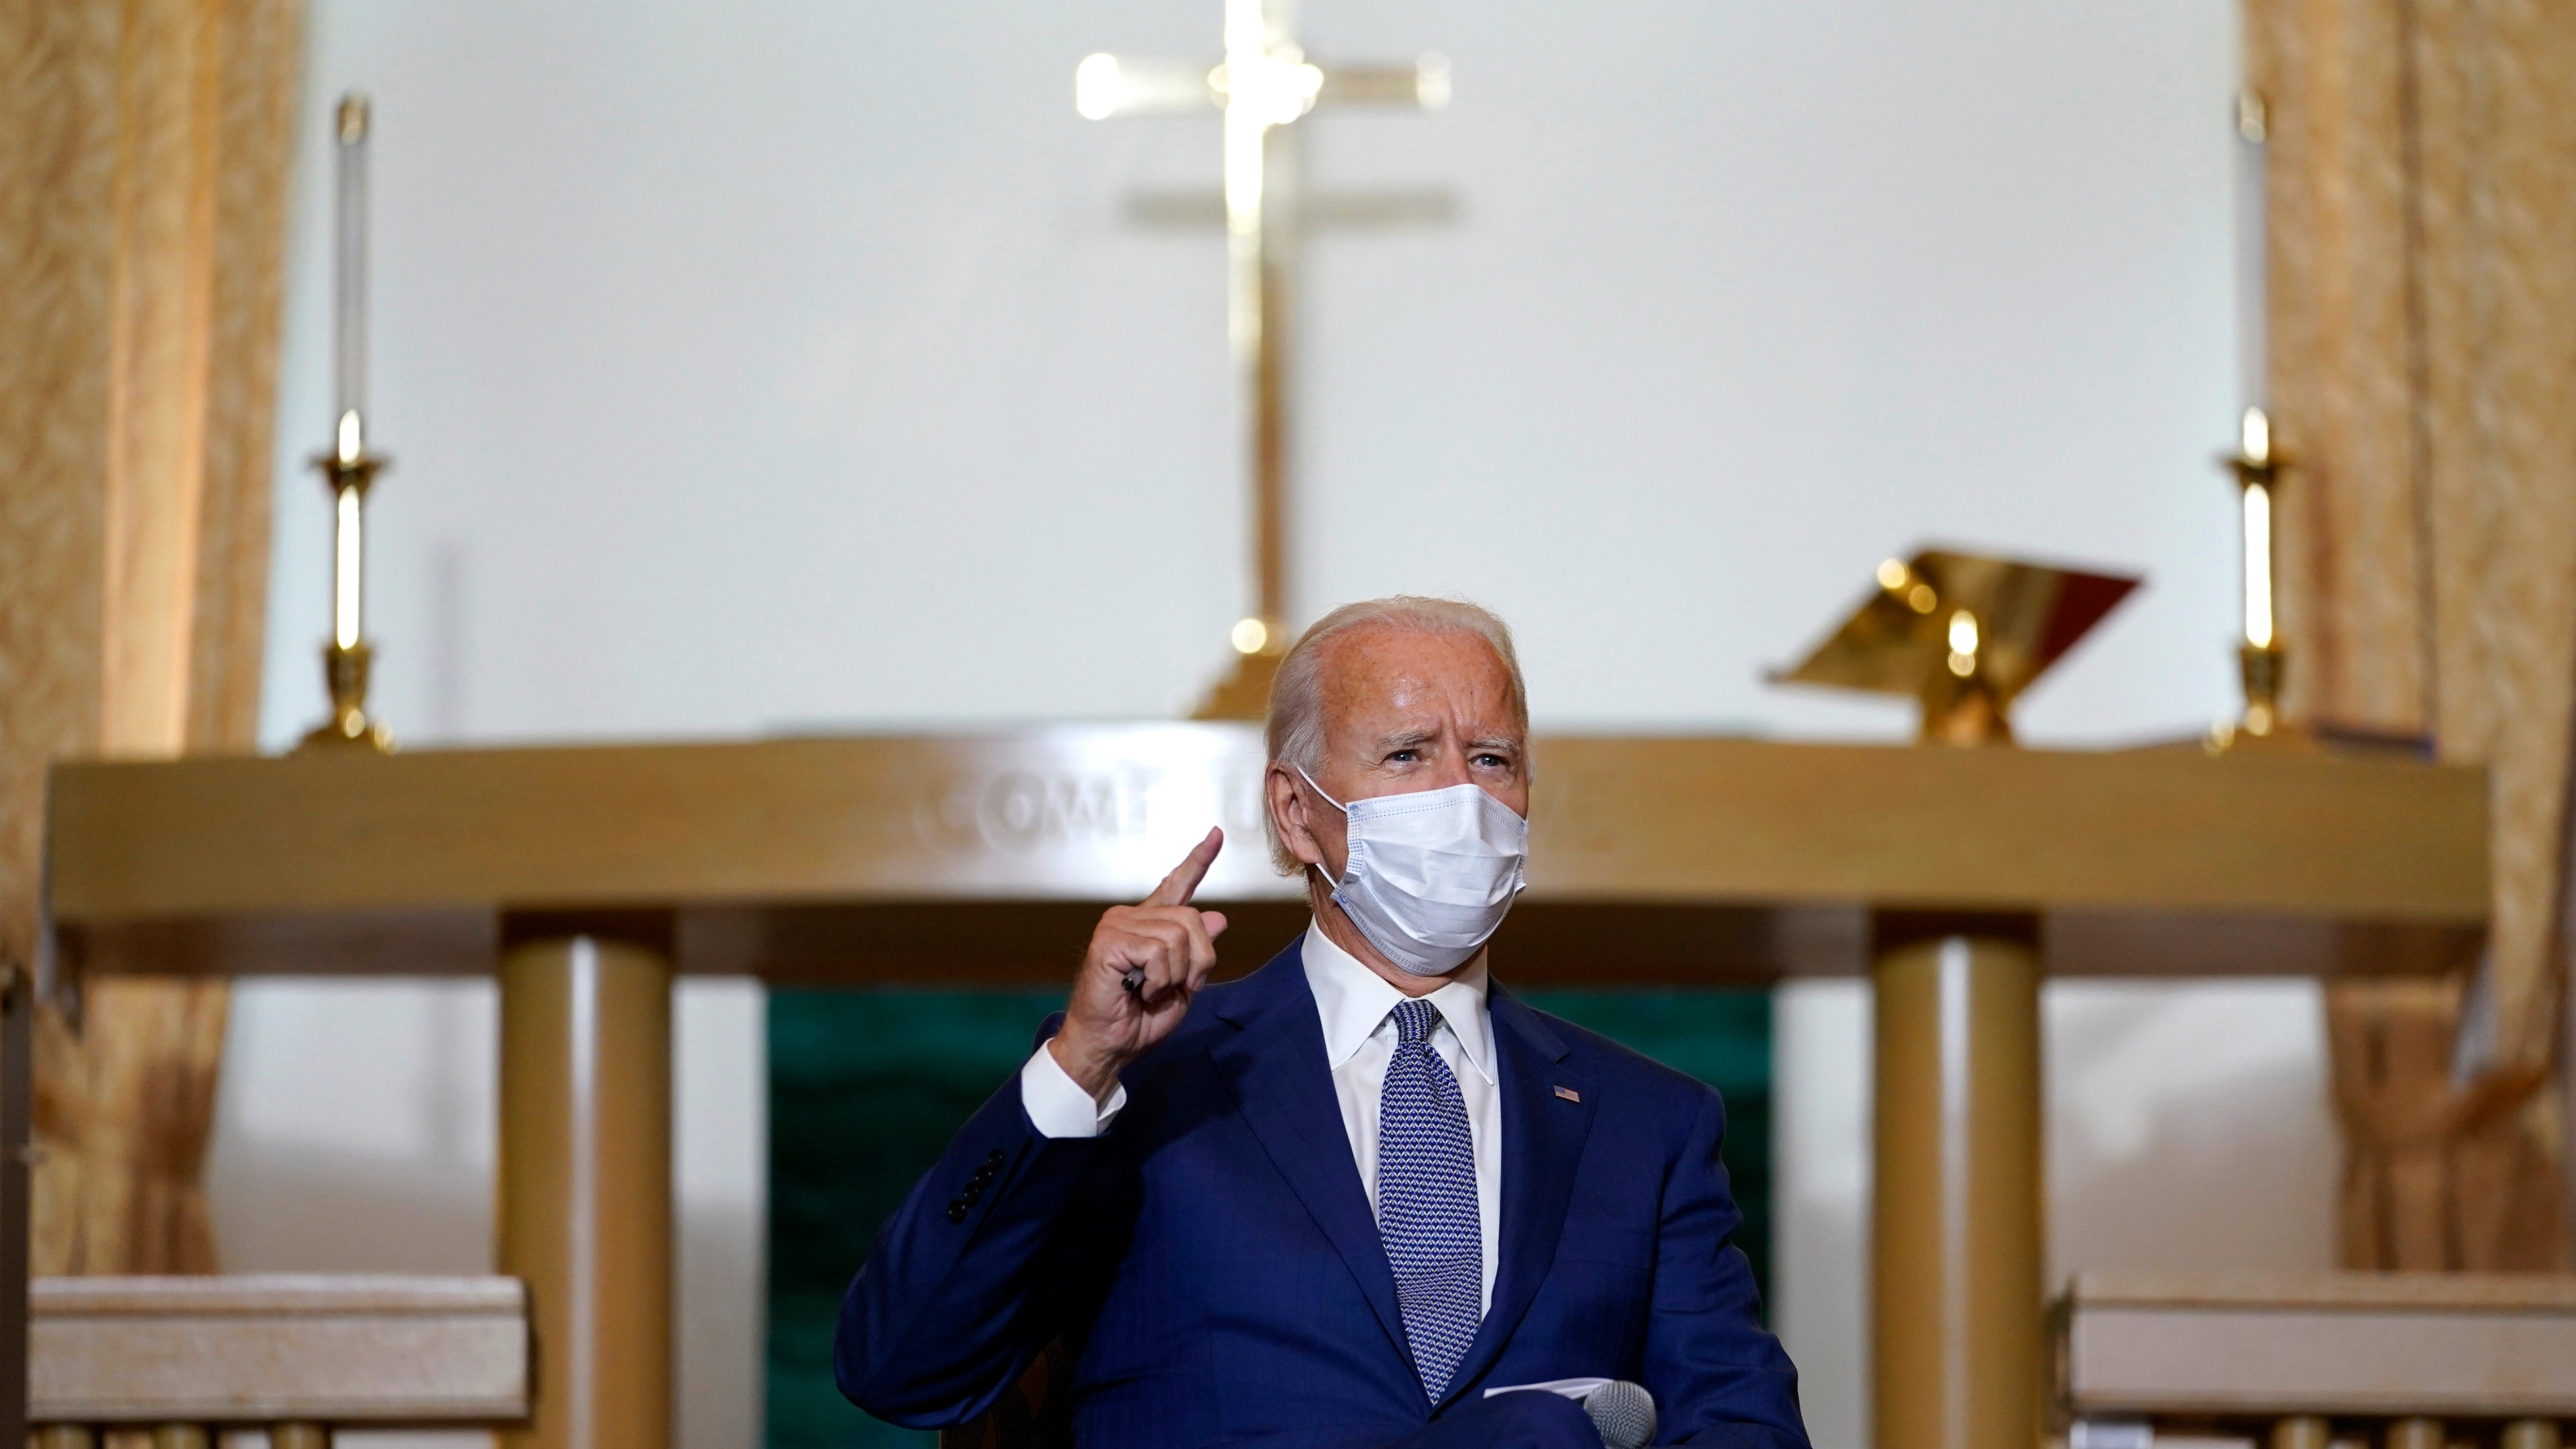 Democratic presidential candidate and former Vice President Joe Biden meets with community members at Grace Lutheran Church in Kenosha on Thursday.